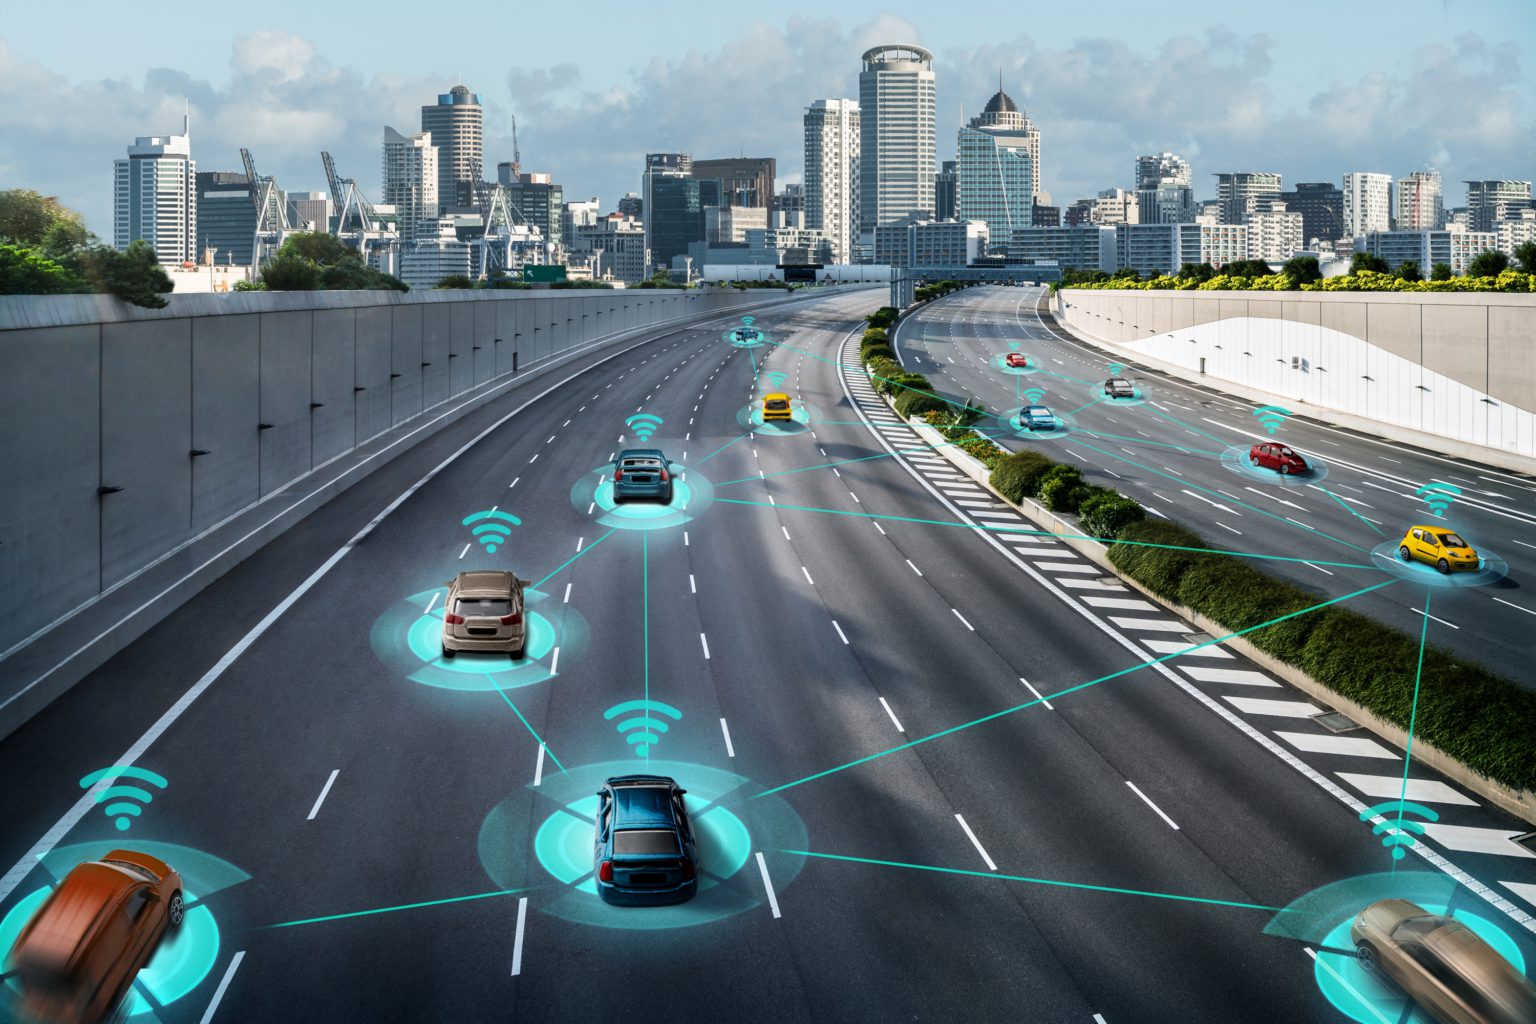 How IoT Based Autonomous Vehicles Disrupting Supply Chain